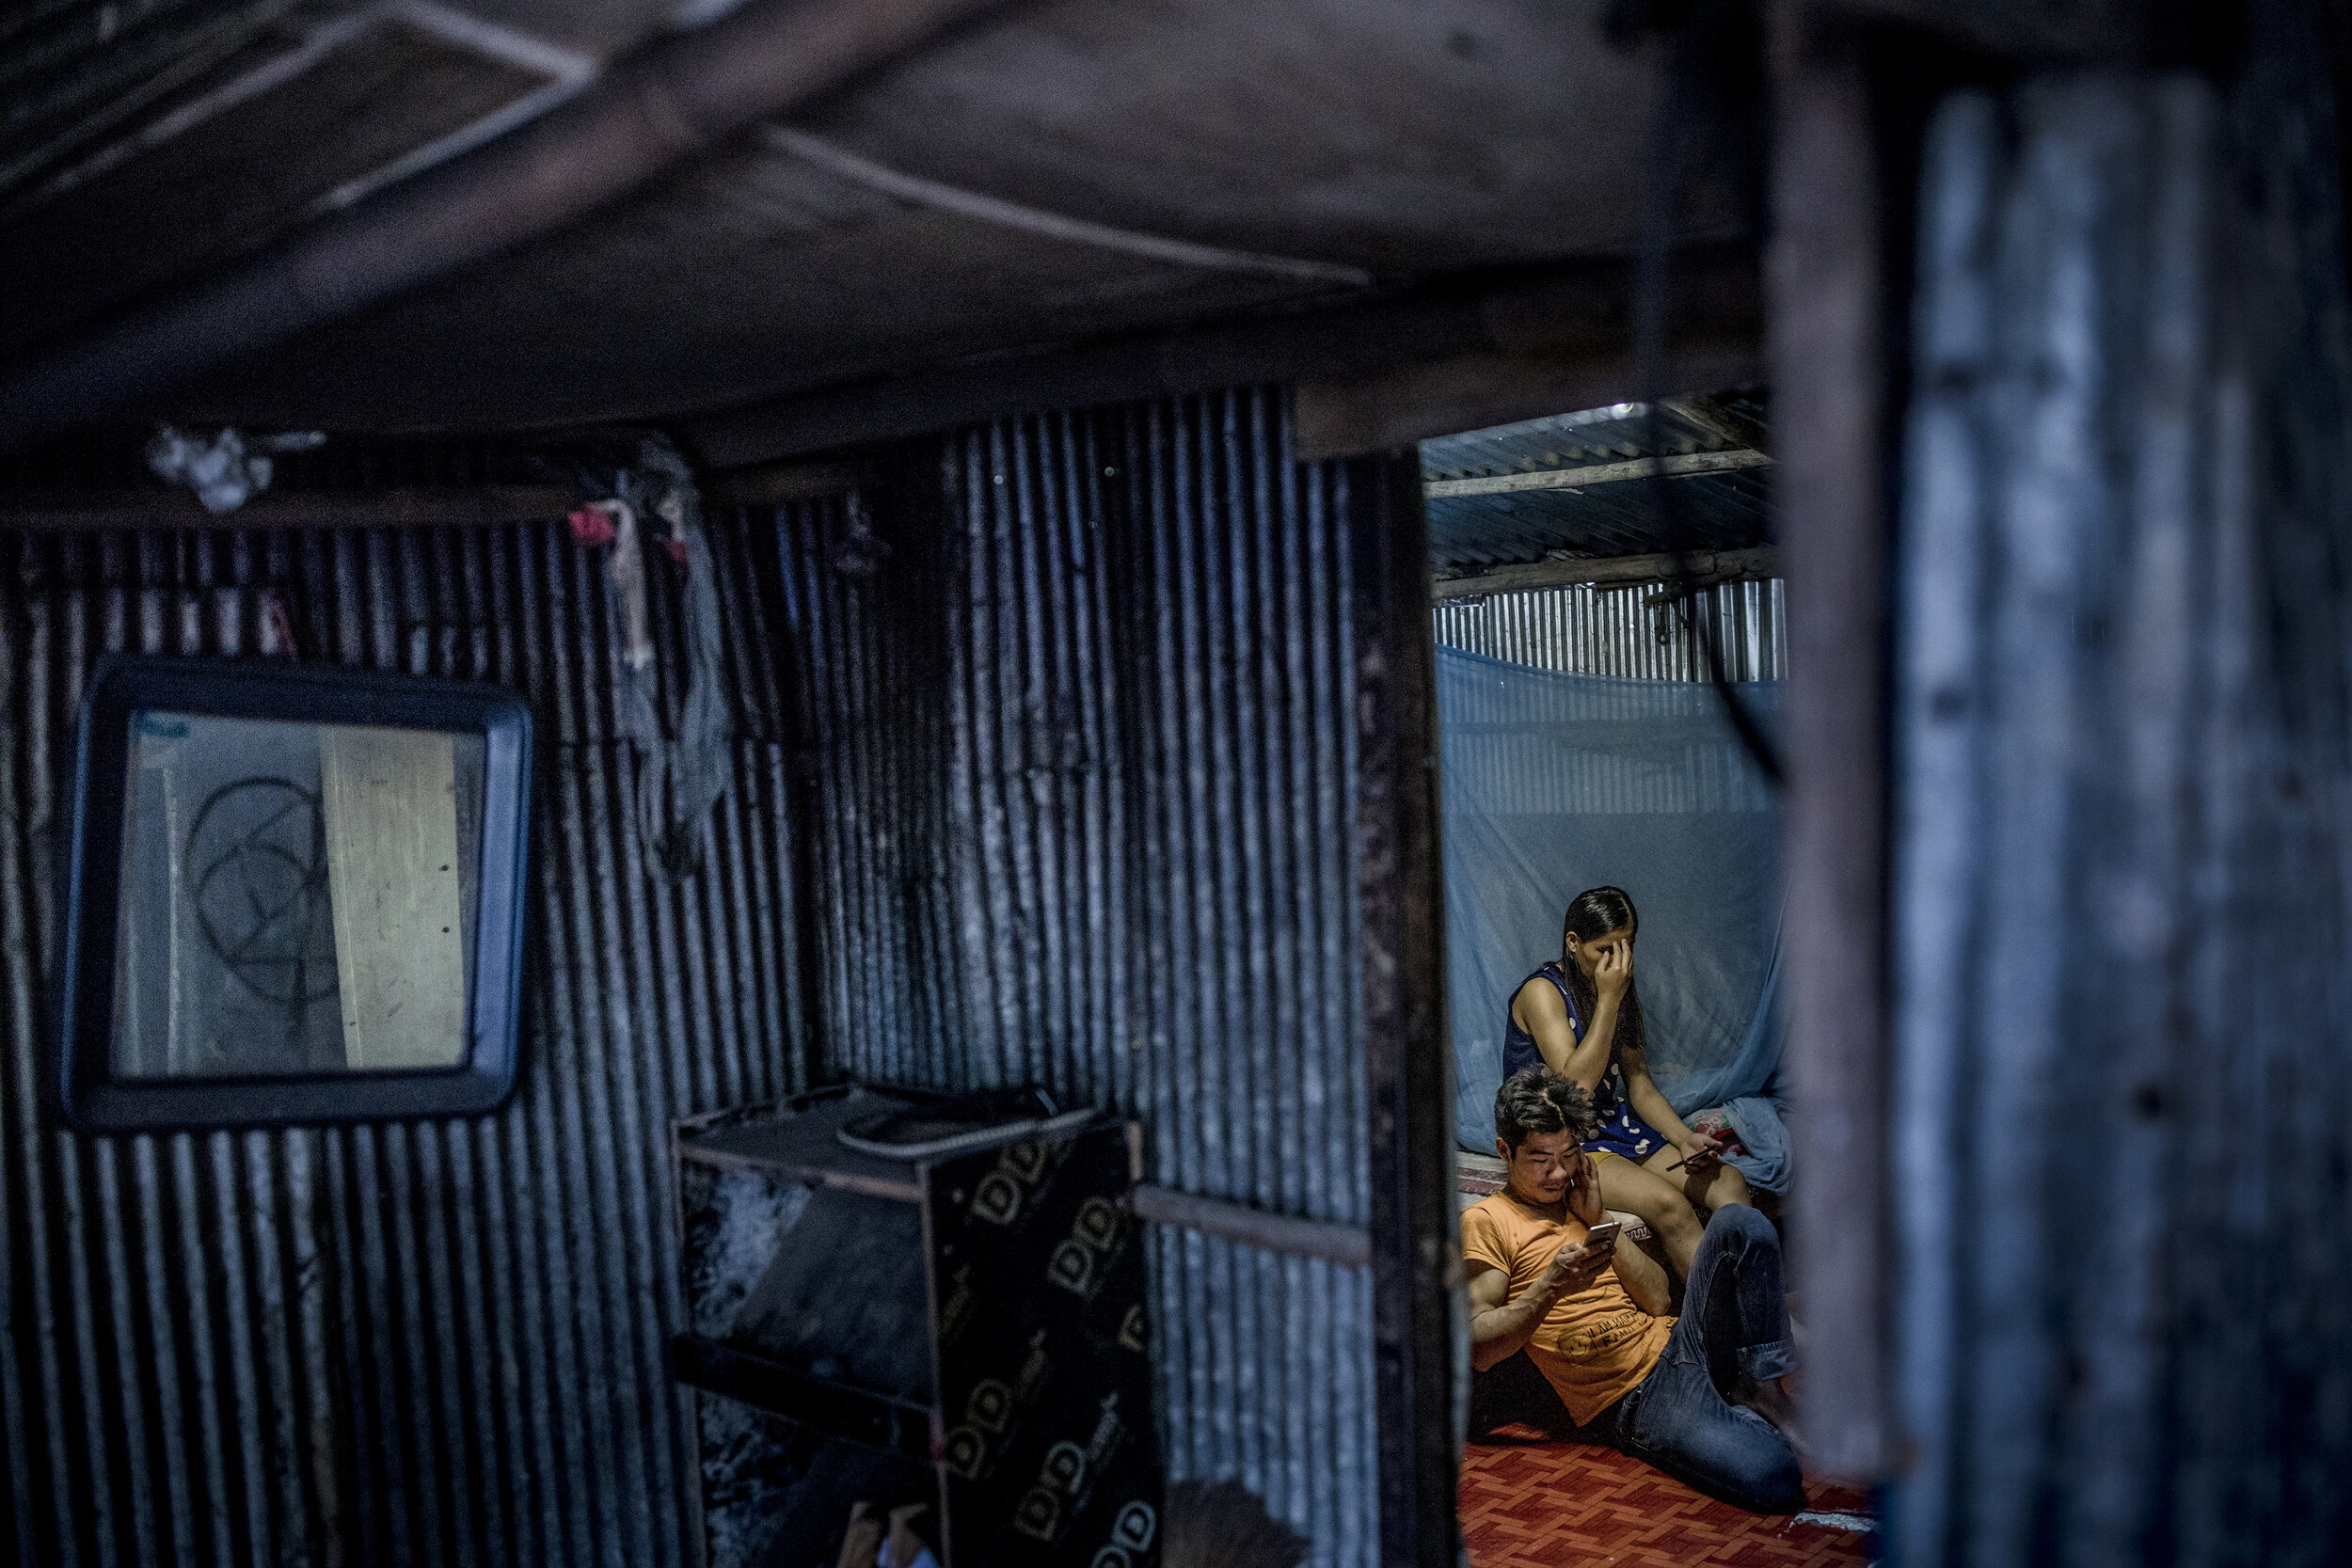  Burmese migrant workers are being housed in a labor camp that has slum-like conditions, Chaing Mai / Thailand- 2019 